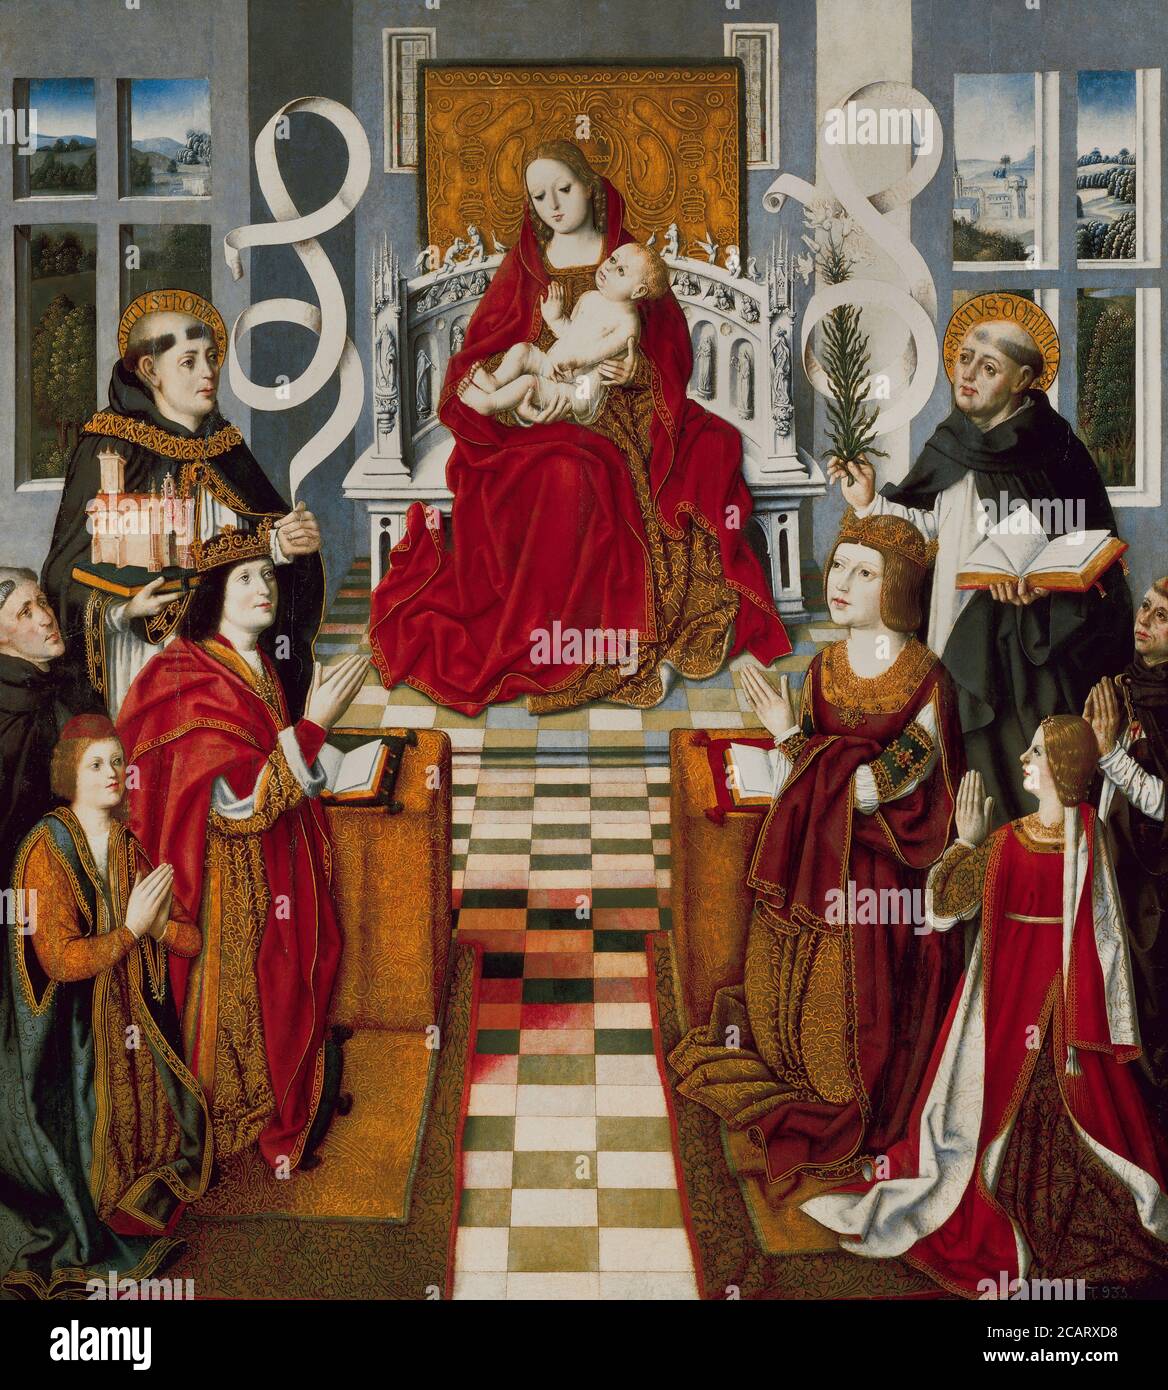 The VIrgin of the Catholic Monarchs, 1491-1493. The Virgin Mary, with the Christ Child on her lap, is worshiped by the Catholic Kings, Isabel (1451-1504) and Fernando (1452-1516), two of their children (Princess Joanna, prince John), and others. On the right of the painting, accompanying the Queen, are Saint Dominic (1170-1221), one of the Queen's daughters and a kneeling male figure without a halo. The sword on his chest implies martyrdom, and he has been associated with Pedro de Arbues, the Inquisitor of Aragon who was assassinated in 1485. On the left, behind the King, Saint Thomas, Prince Stock Photo